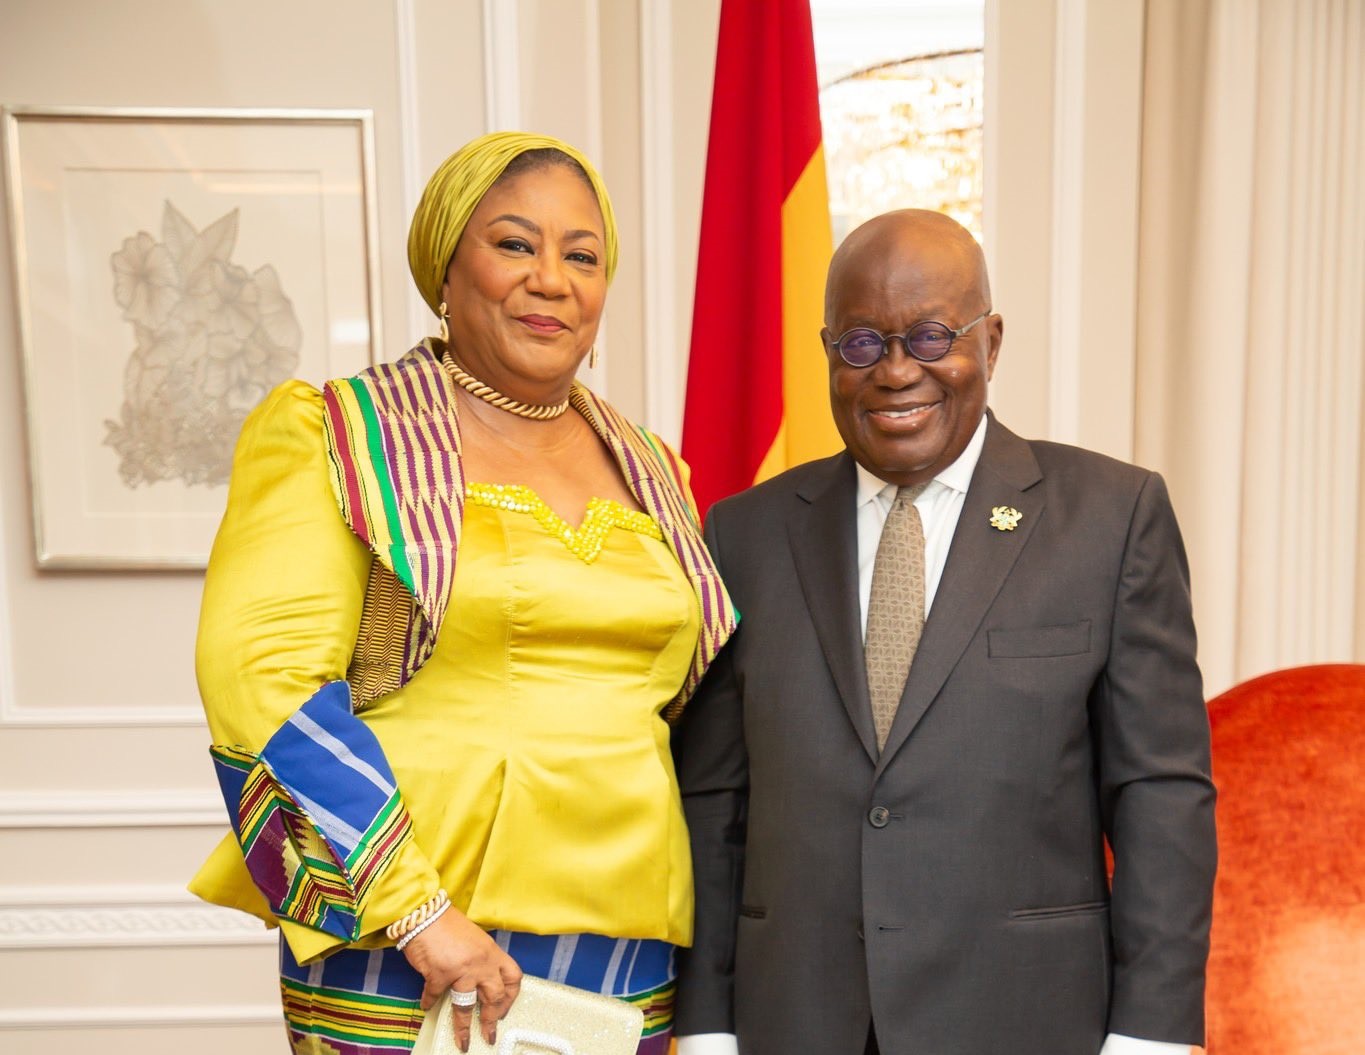 My opponents accused me of killing my ex-wife and drug trafficking - Akufo-Addo